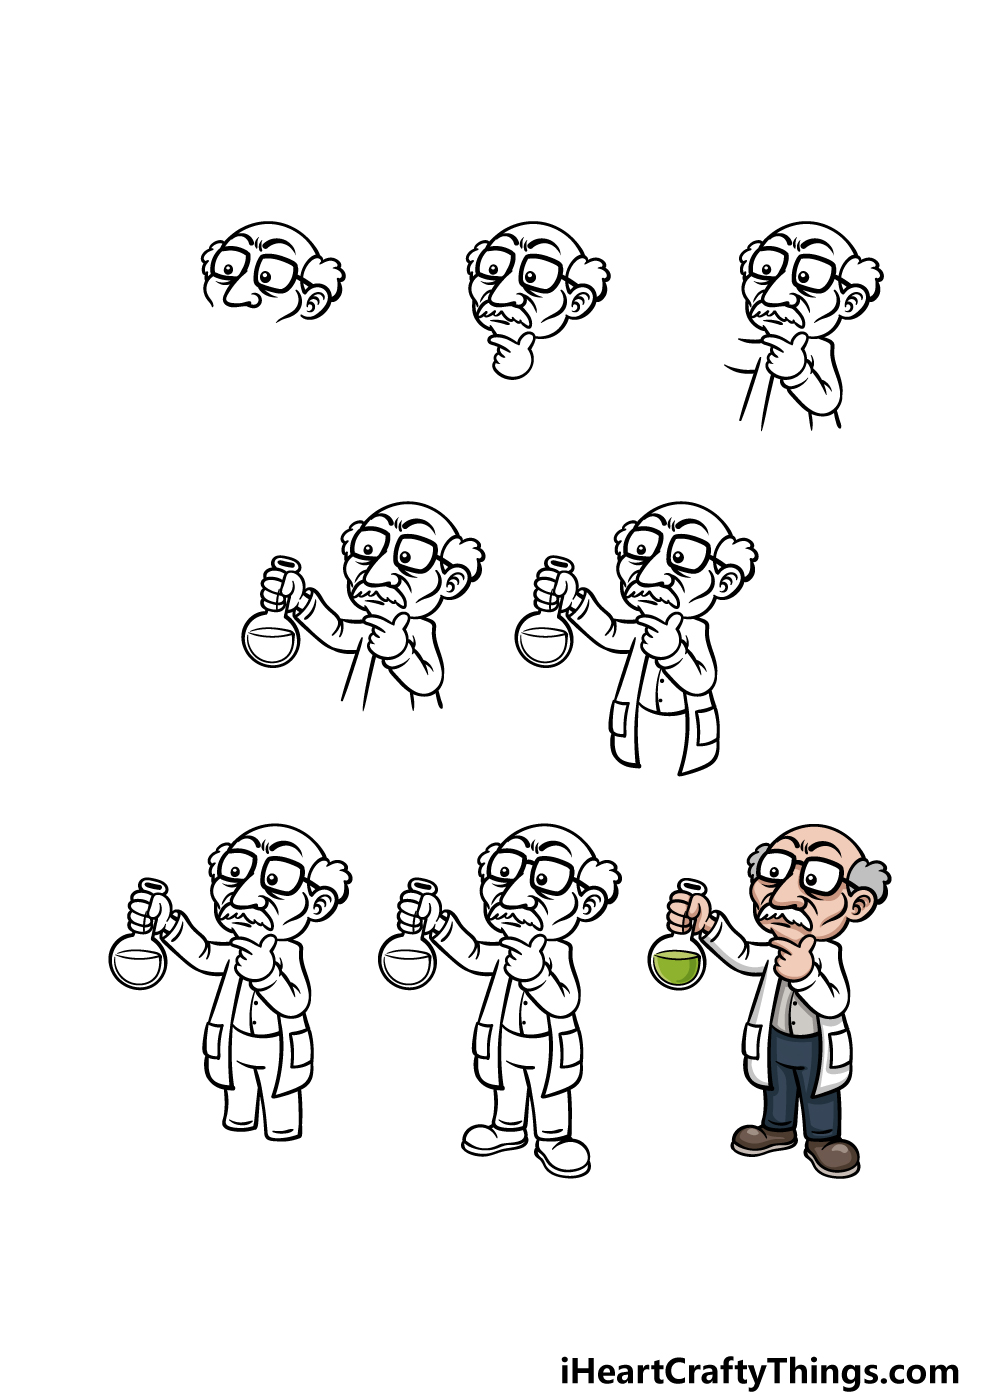 how to draw a cartoon scientist in 8 steps